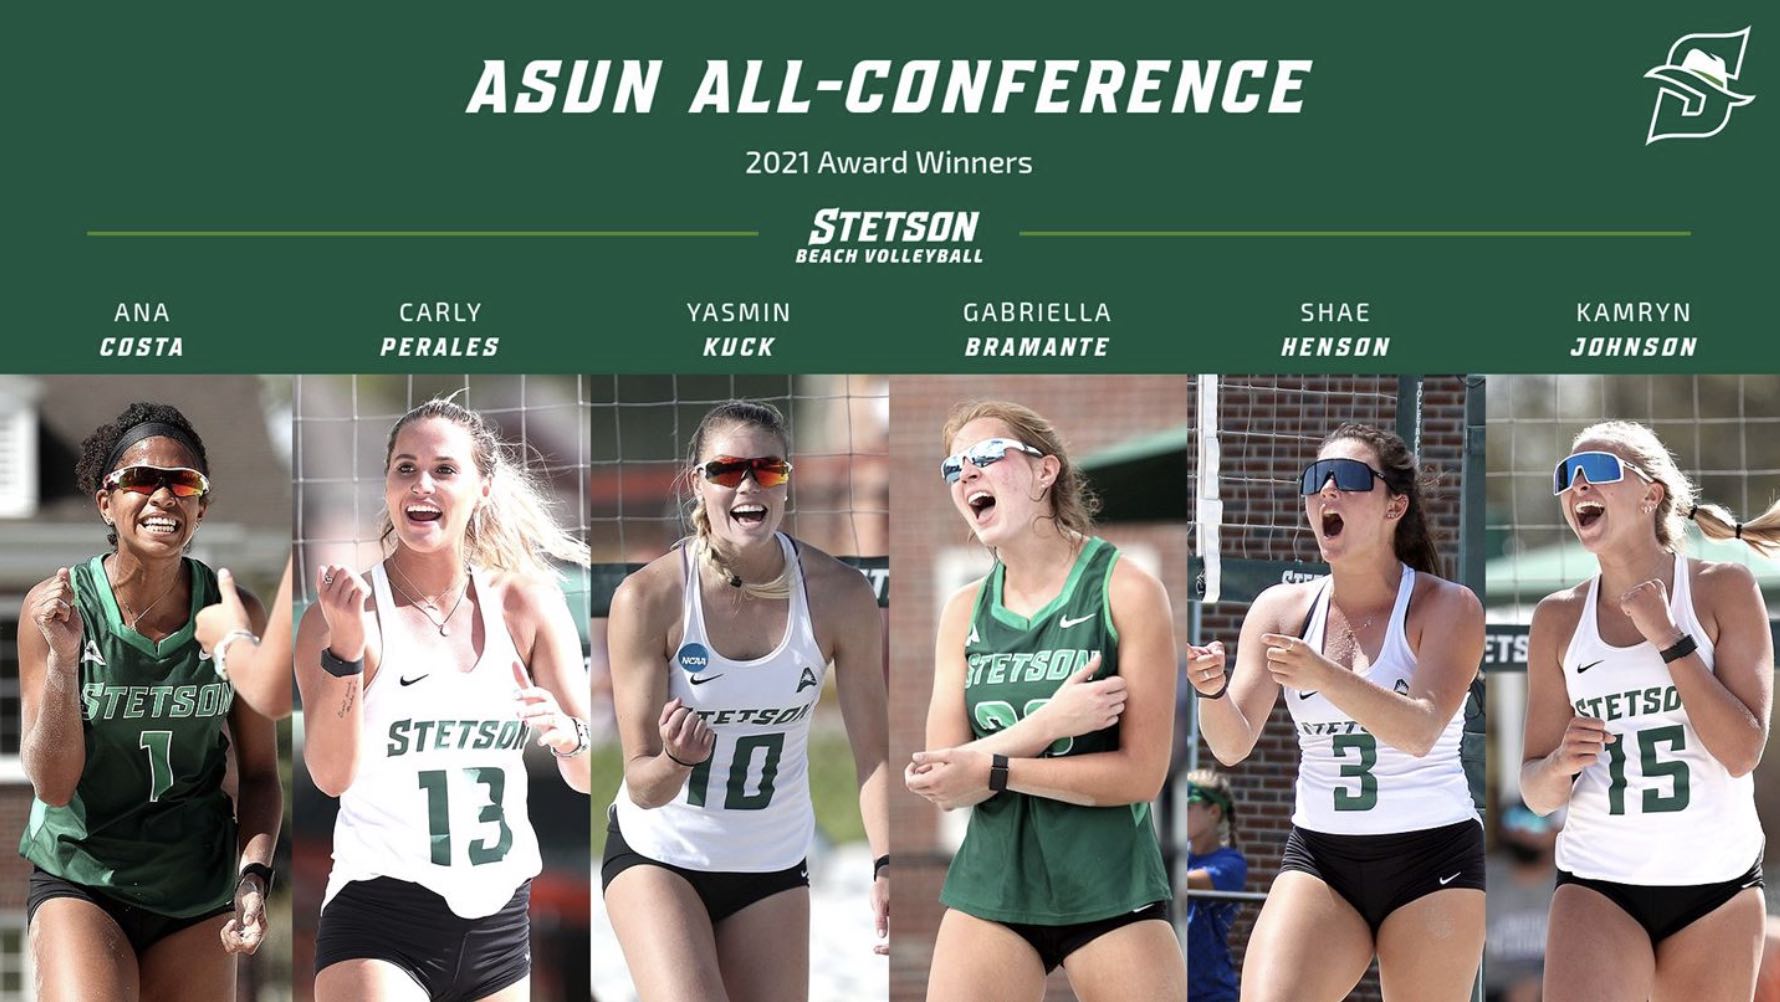 montage of photos of 6 beach volleyball players with ASUN recognition.